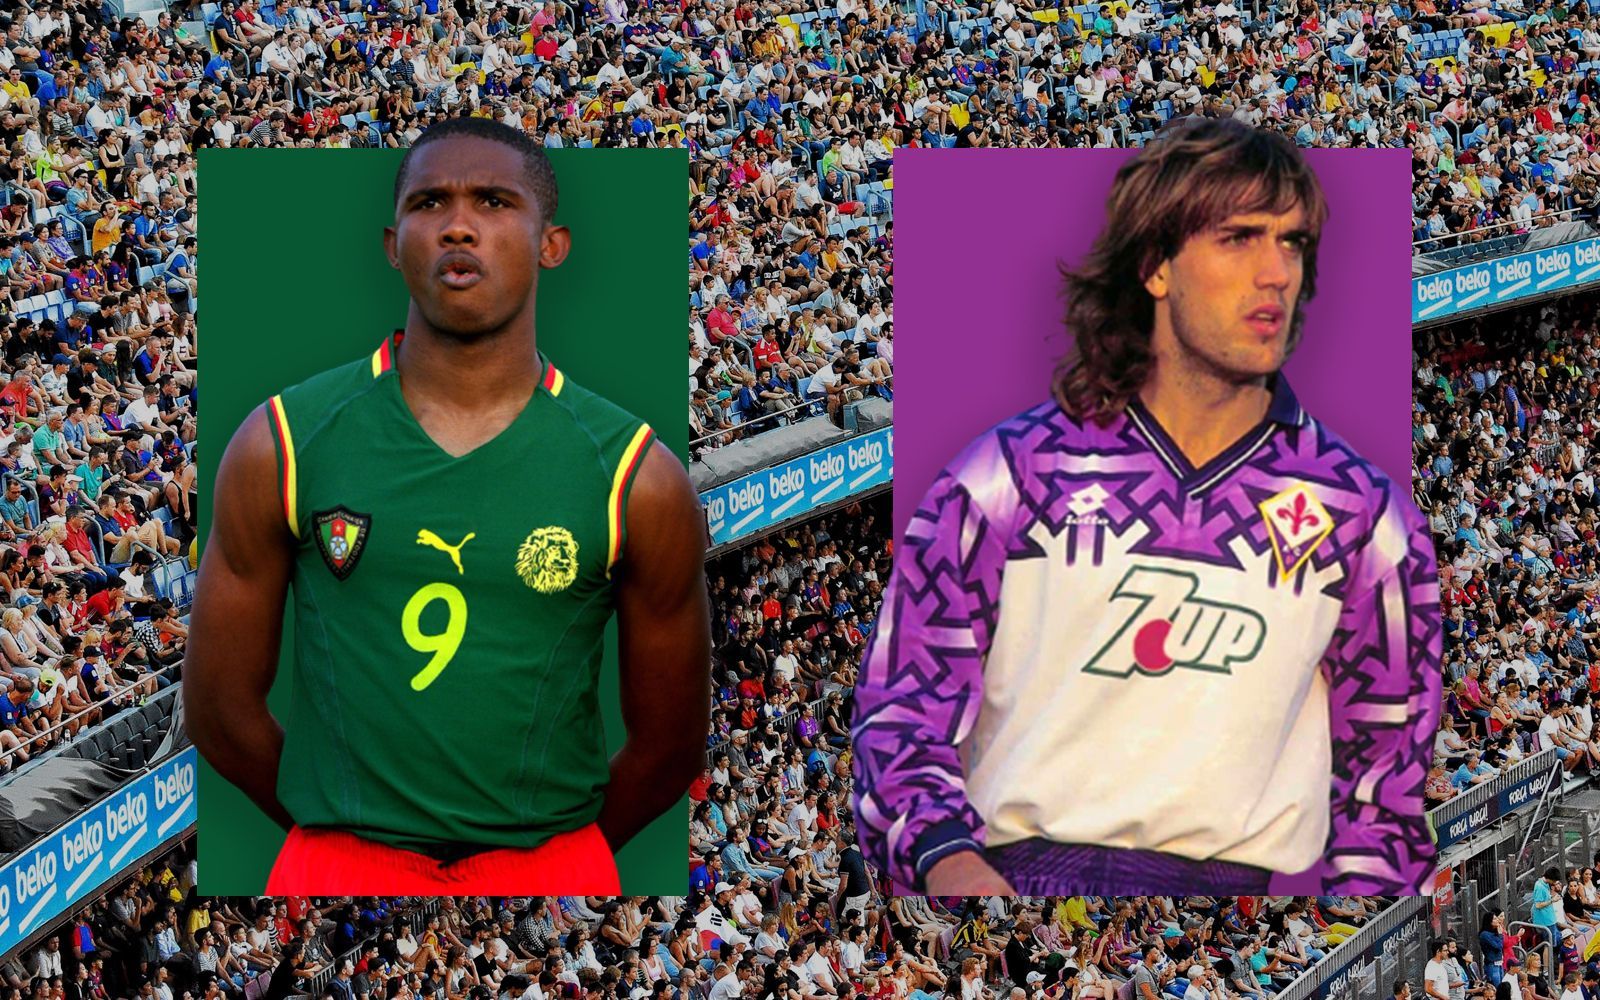 The best kits in international football right now